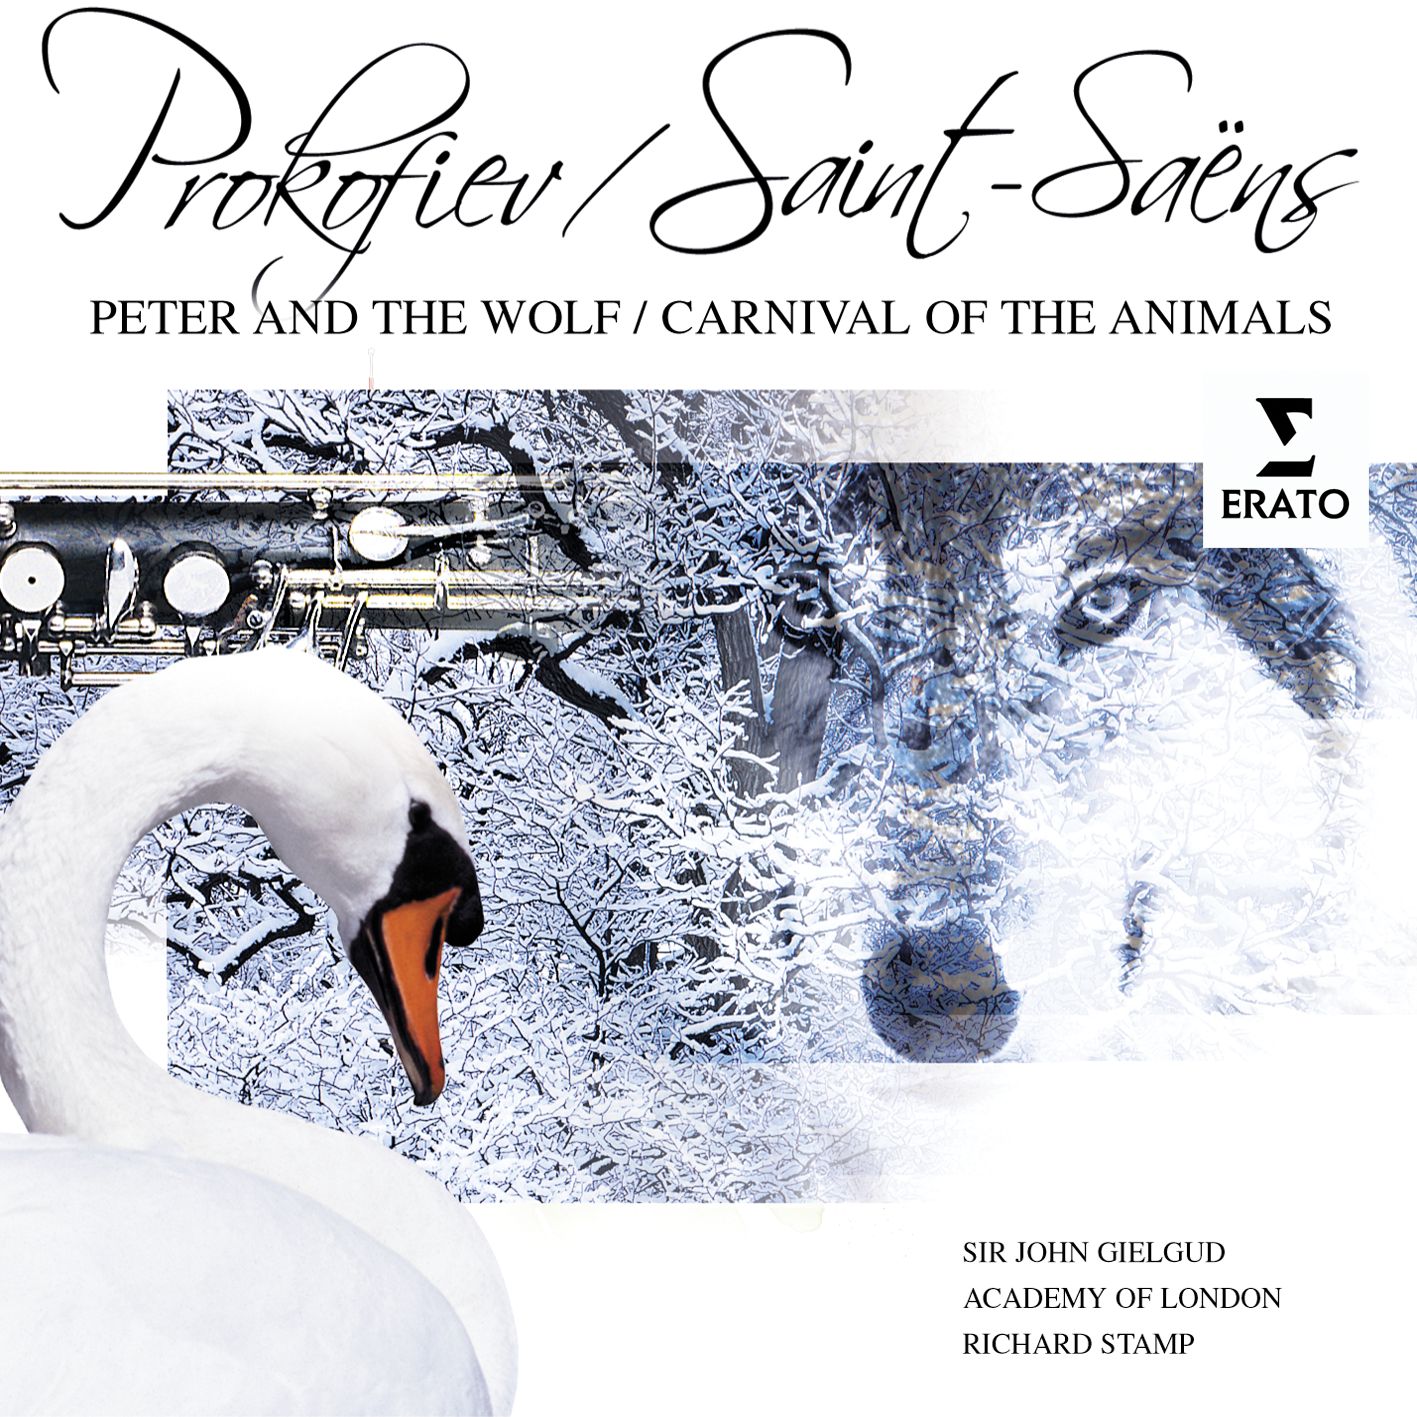 Prokofiev: Peter and the Wolf  SaintSa ns: Carnival of the Animals